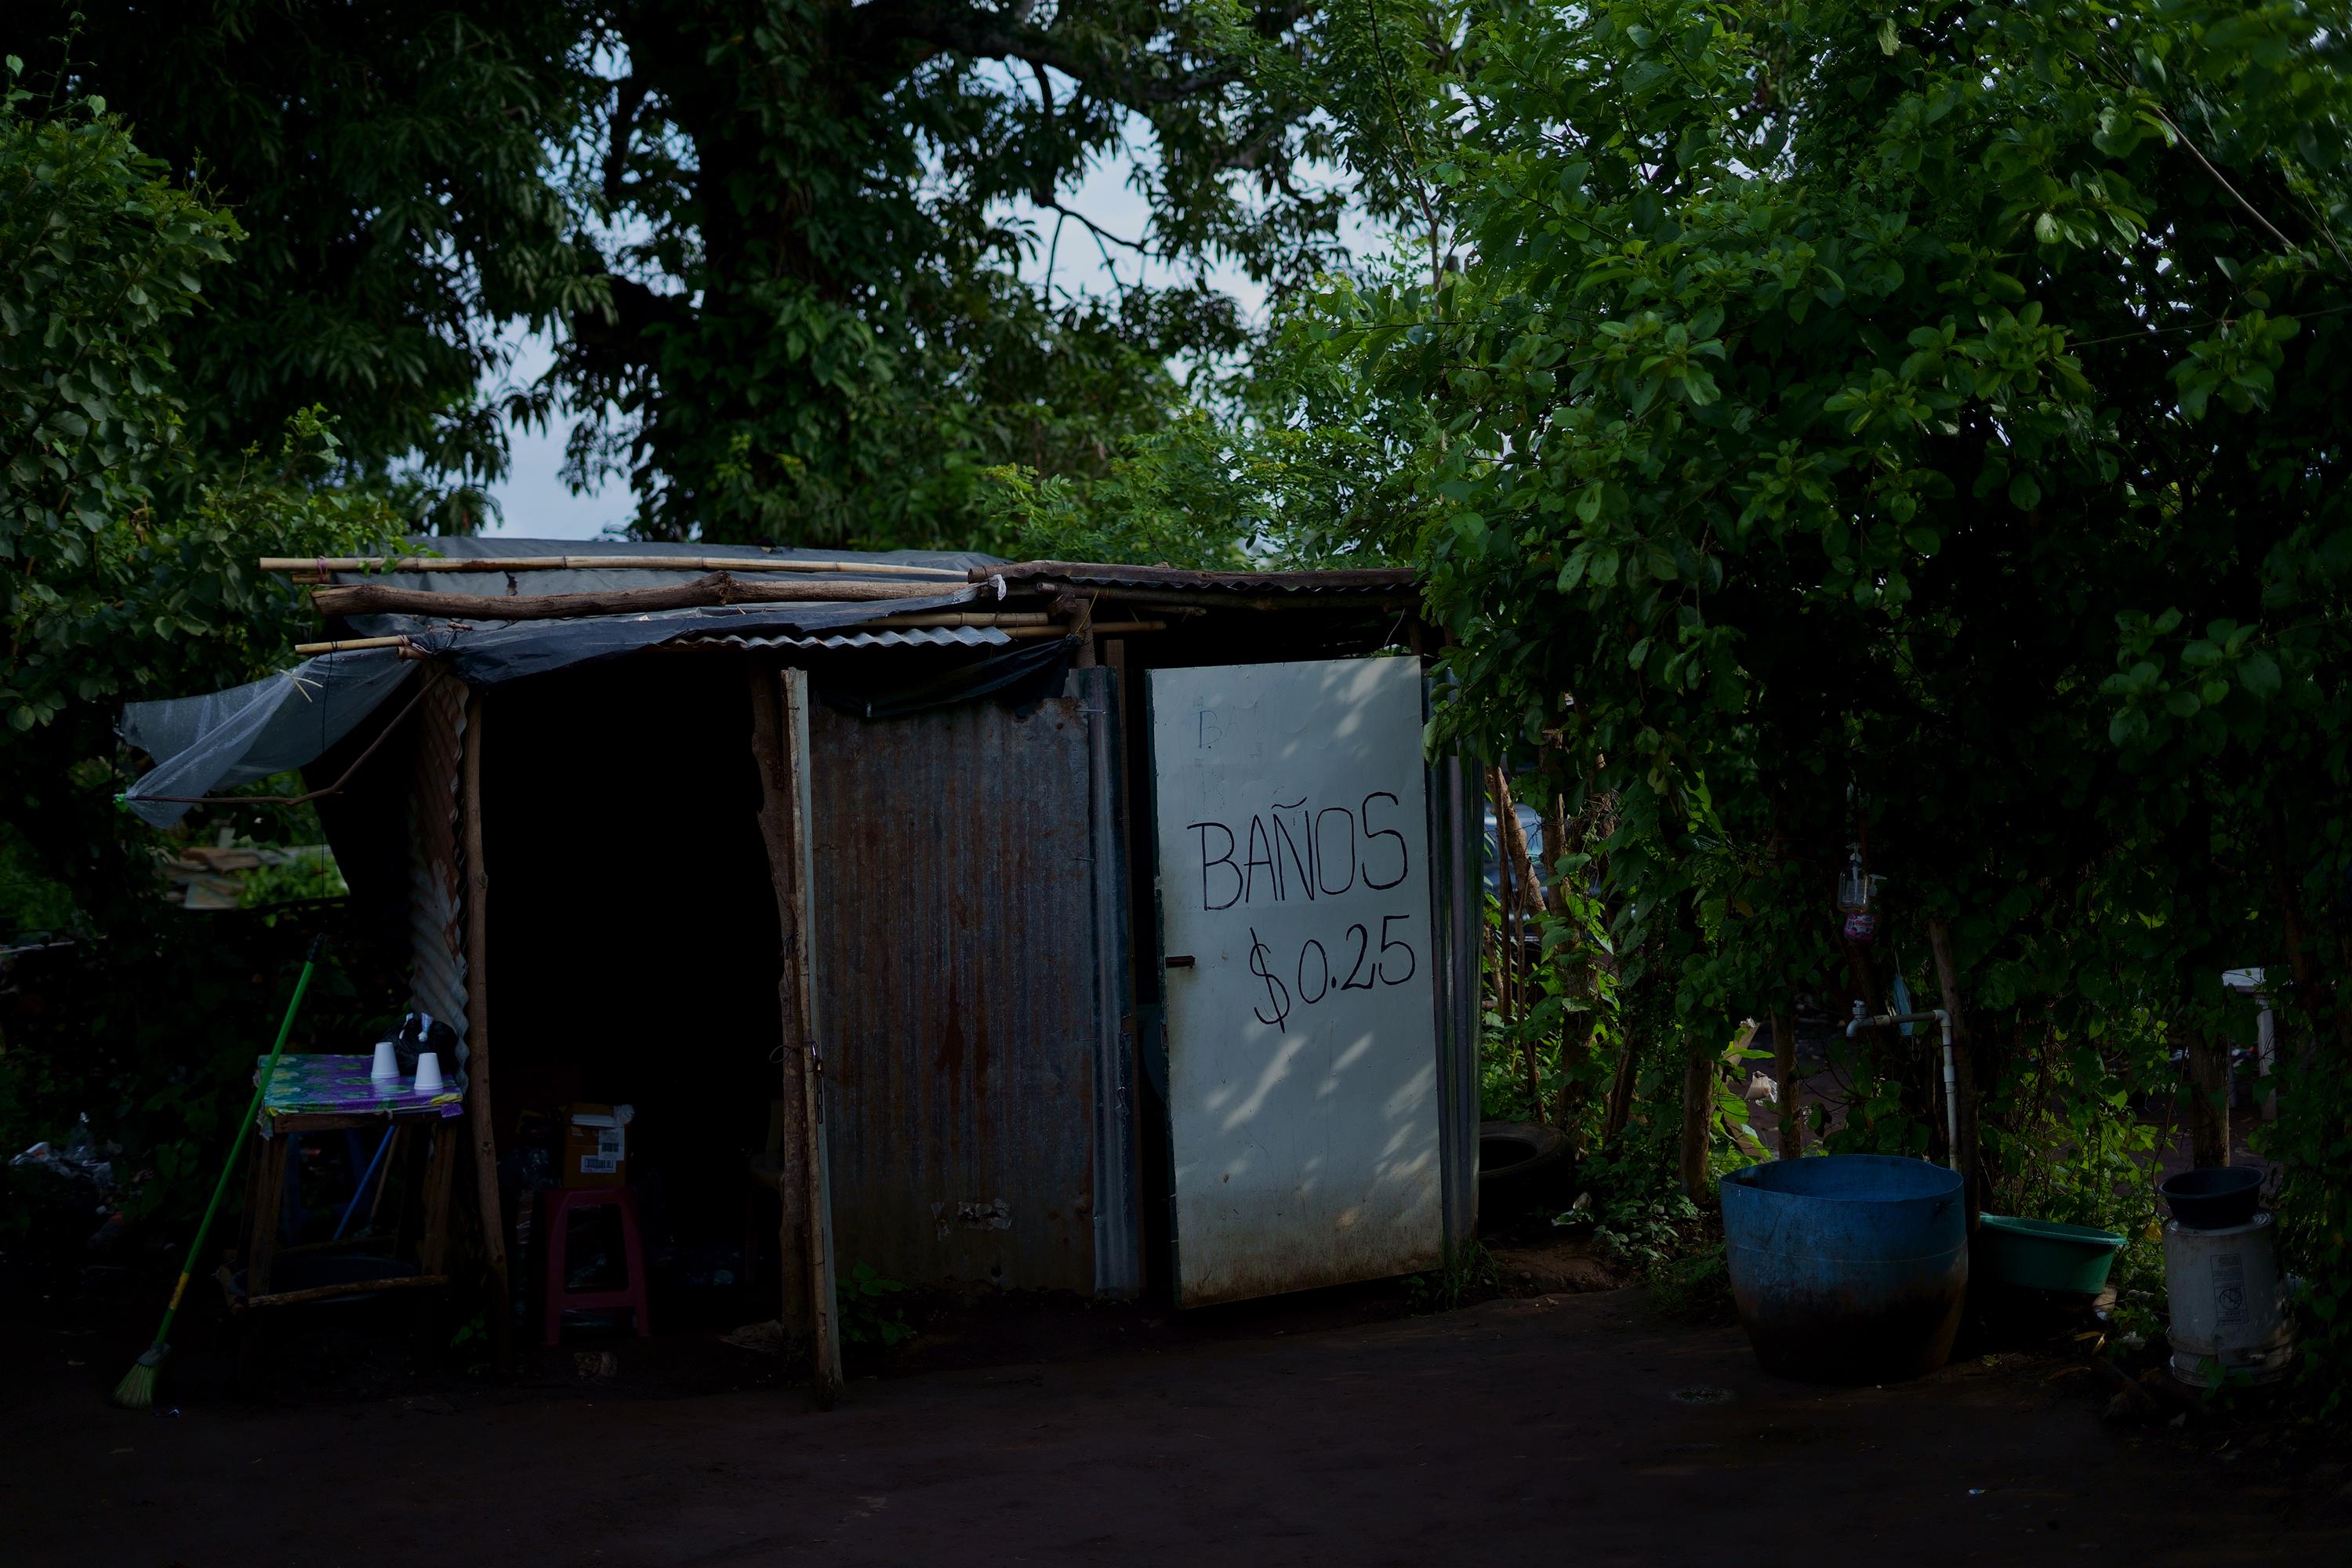 Most of the people with homes near Izalco Prison rent their bathrooms to family members waiting to deliver packages to their loved ones. After the state of exception began, some residents cleared out vacant lots and set up improvised latrines and temporary parking lots — bathrooms are $.25 per use, and parking is $2.00 per vehicle.